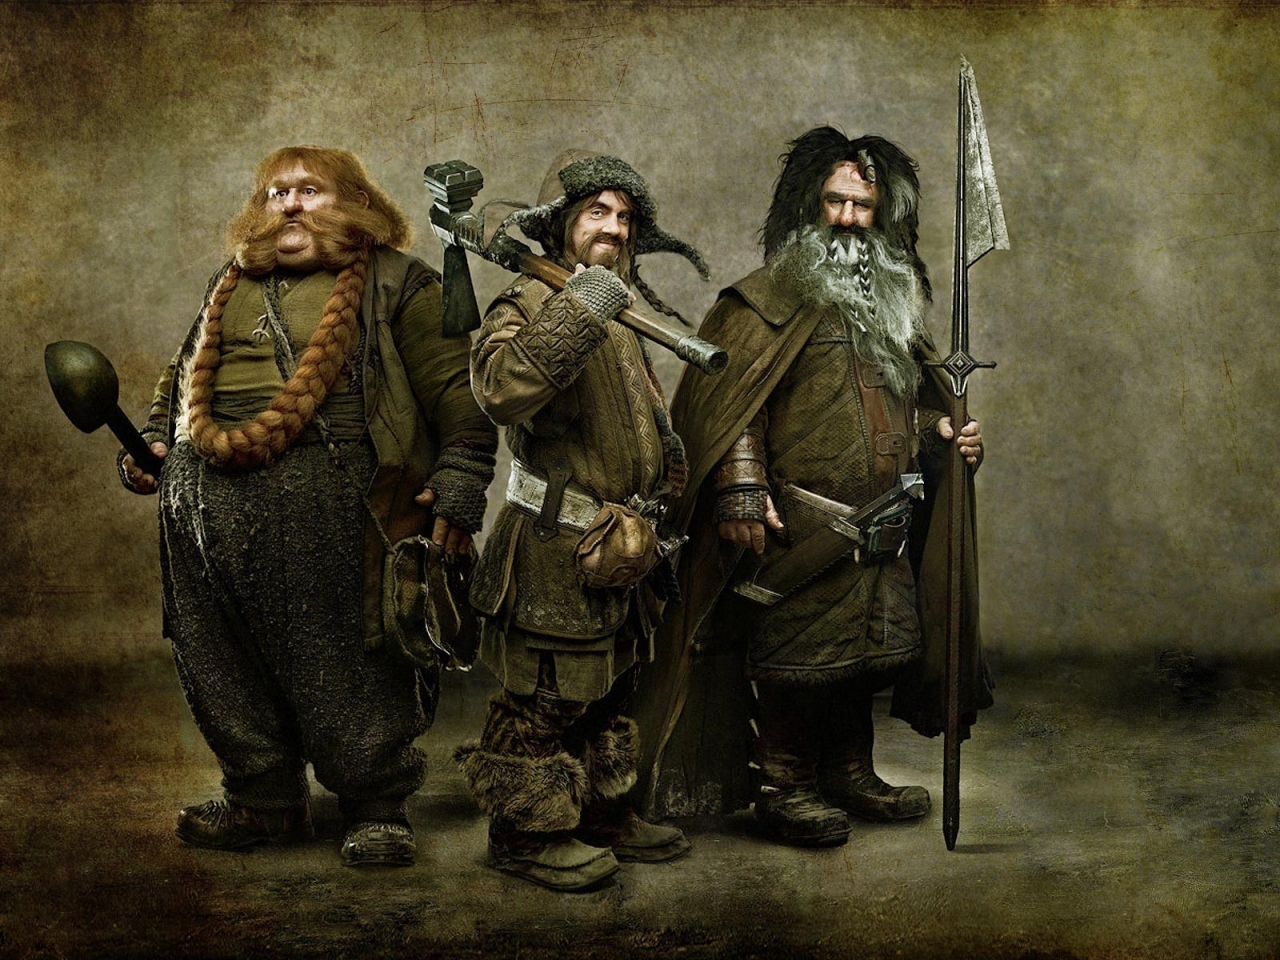 The Hobbit Characters for 1280 x 960 resolution